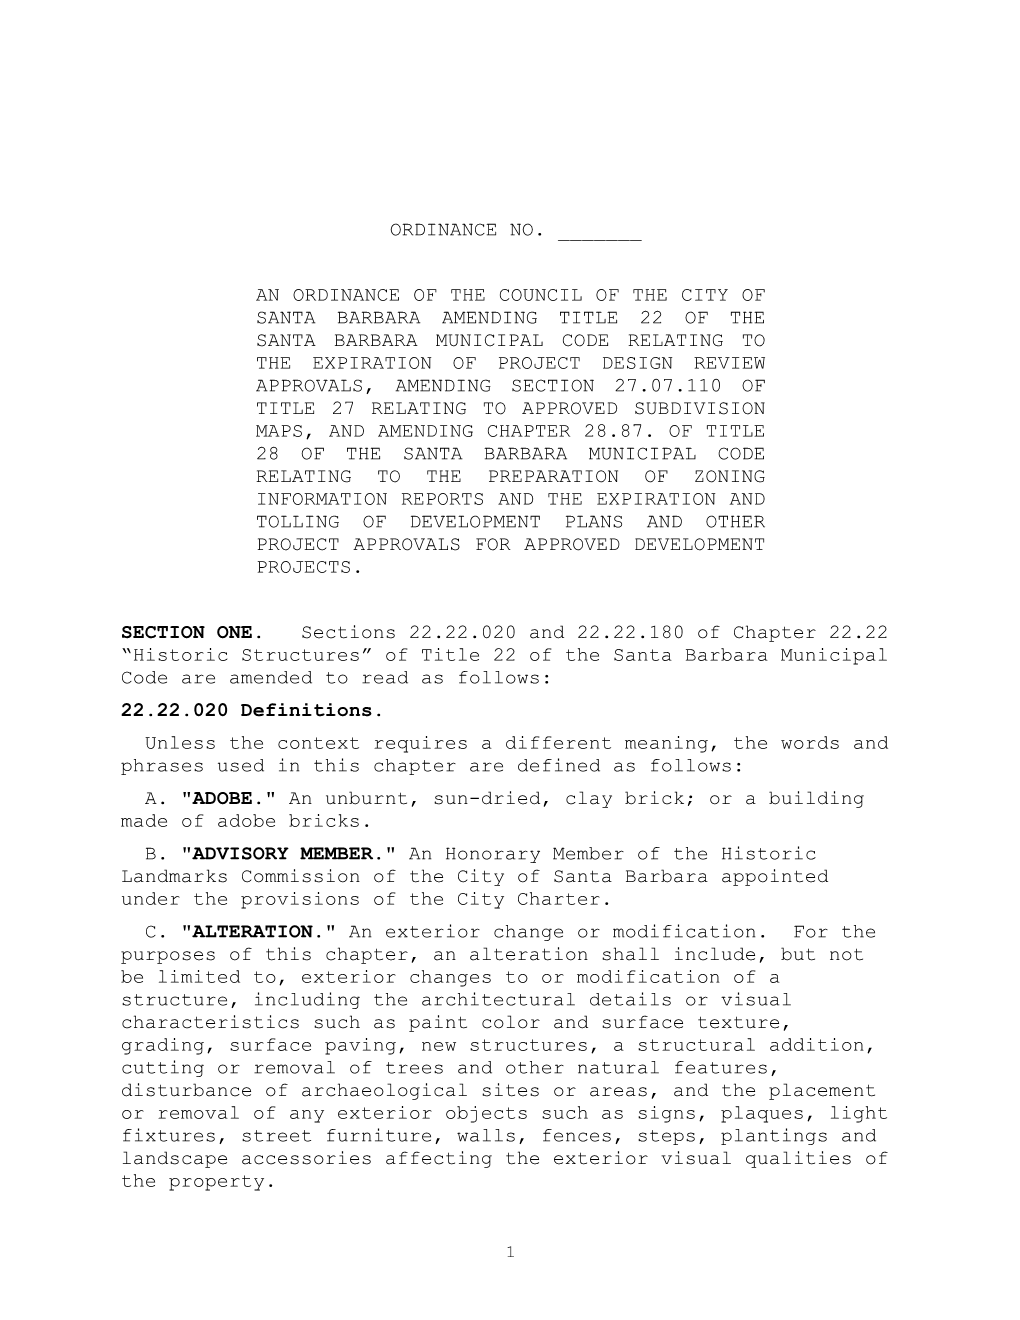 An Ordinance of the Council of the City of Santa Barbara Amending Title 22 of the Santa